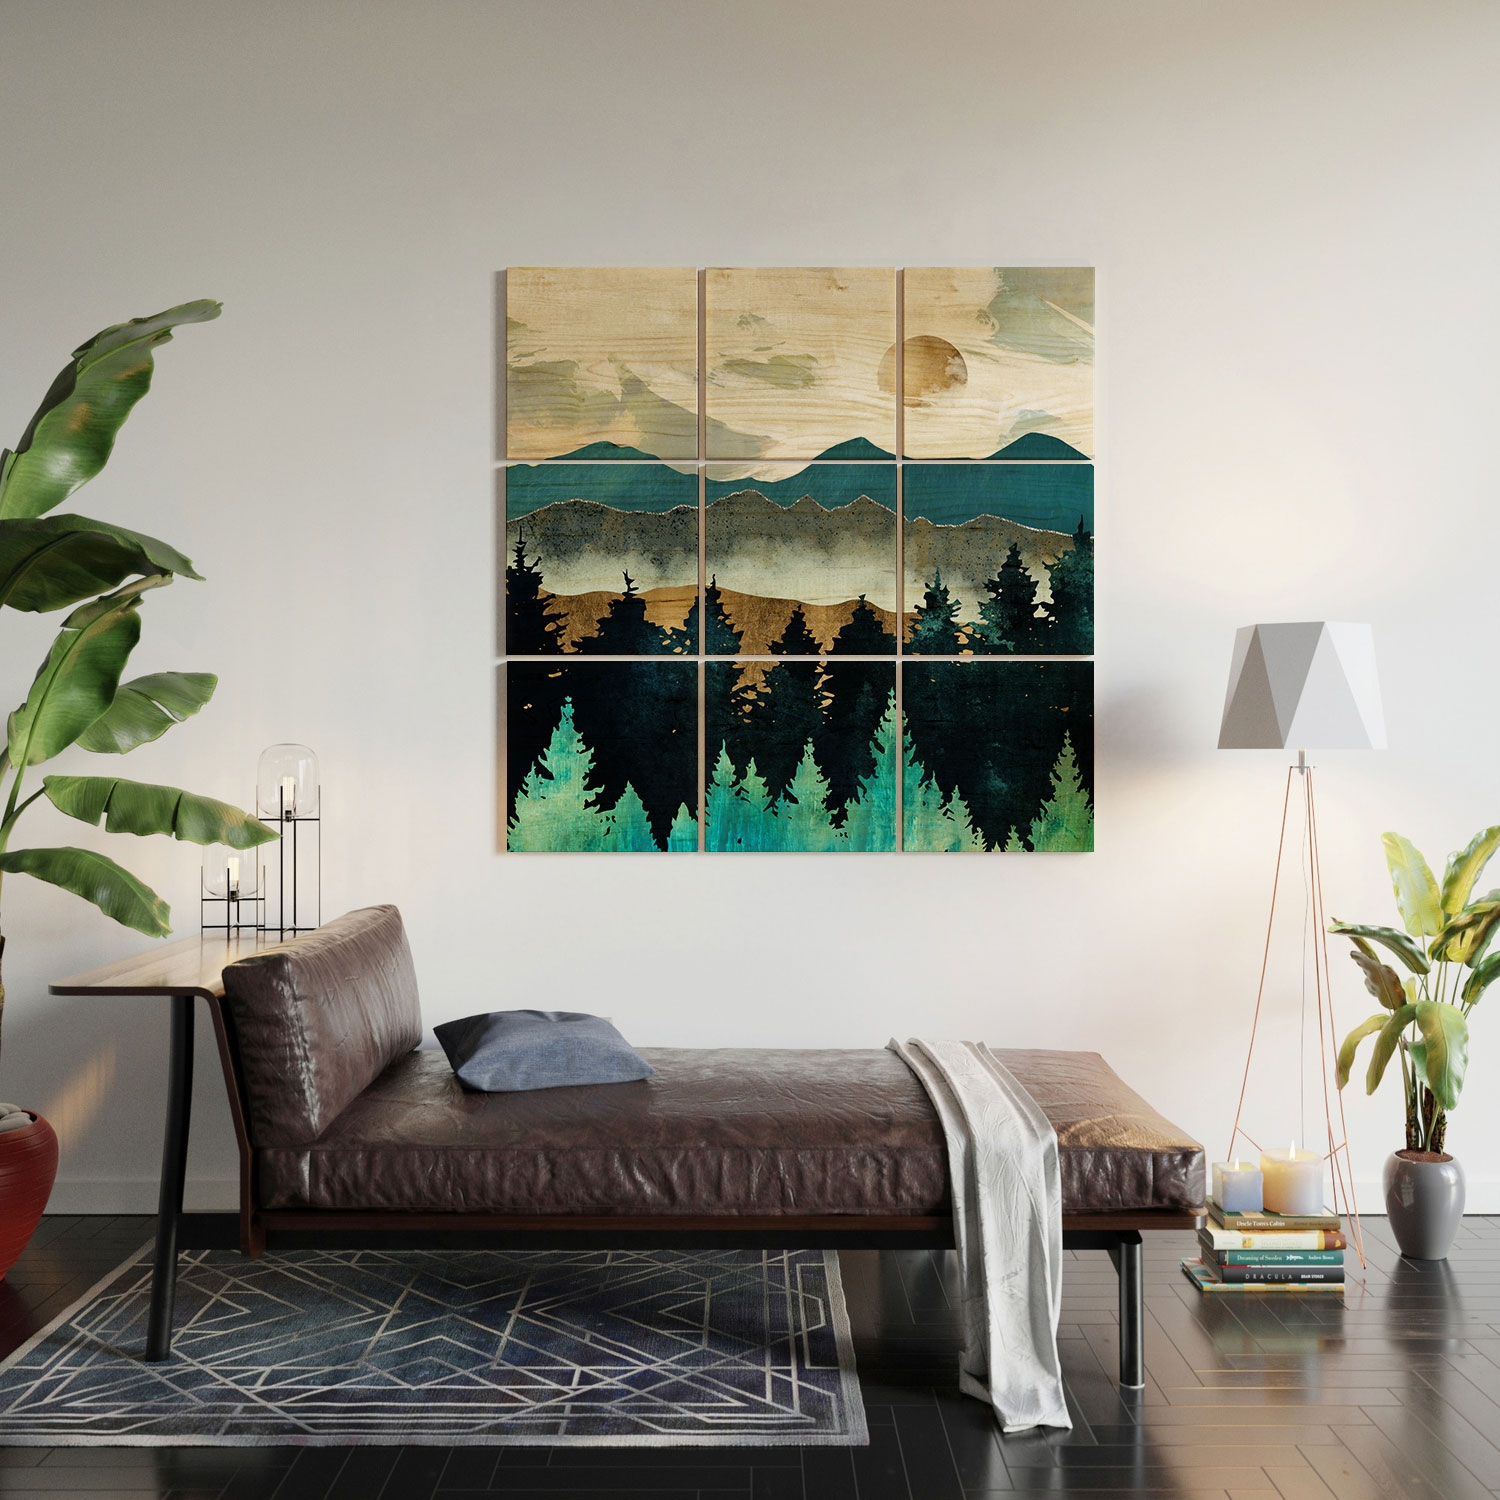 Forest Mist by SpaceFrogDesigns - Wood Wall Mural3' X 3' (Nine 12" Wood Squares) - Image 1